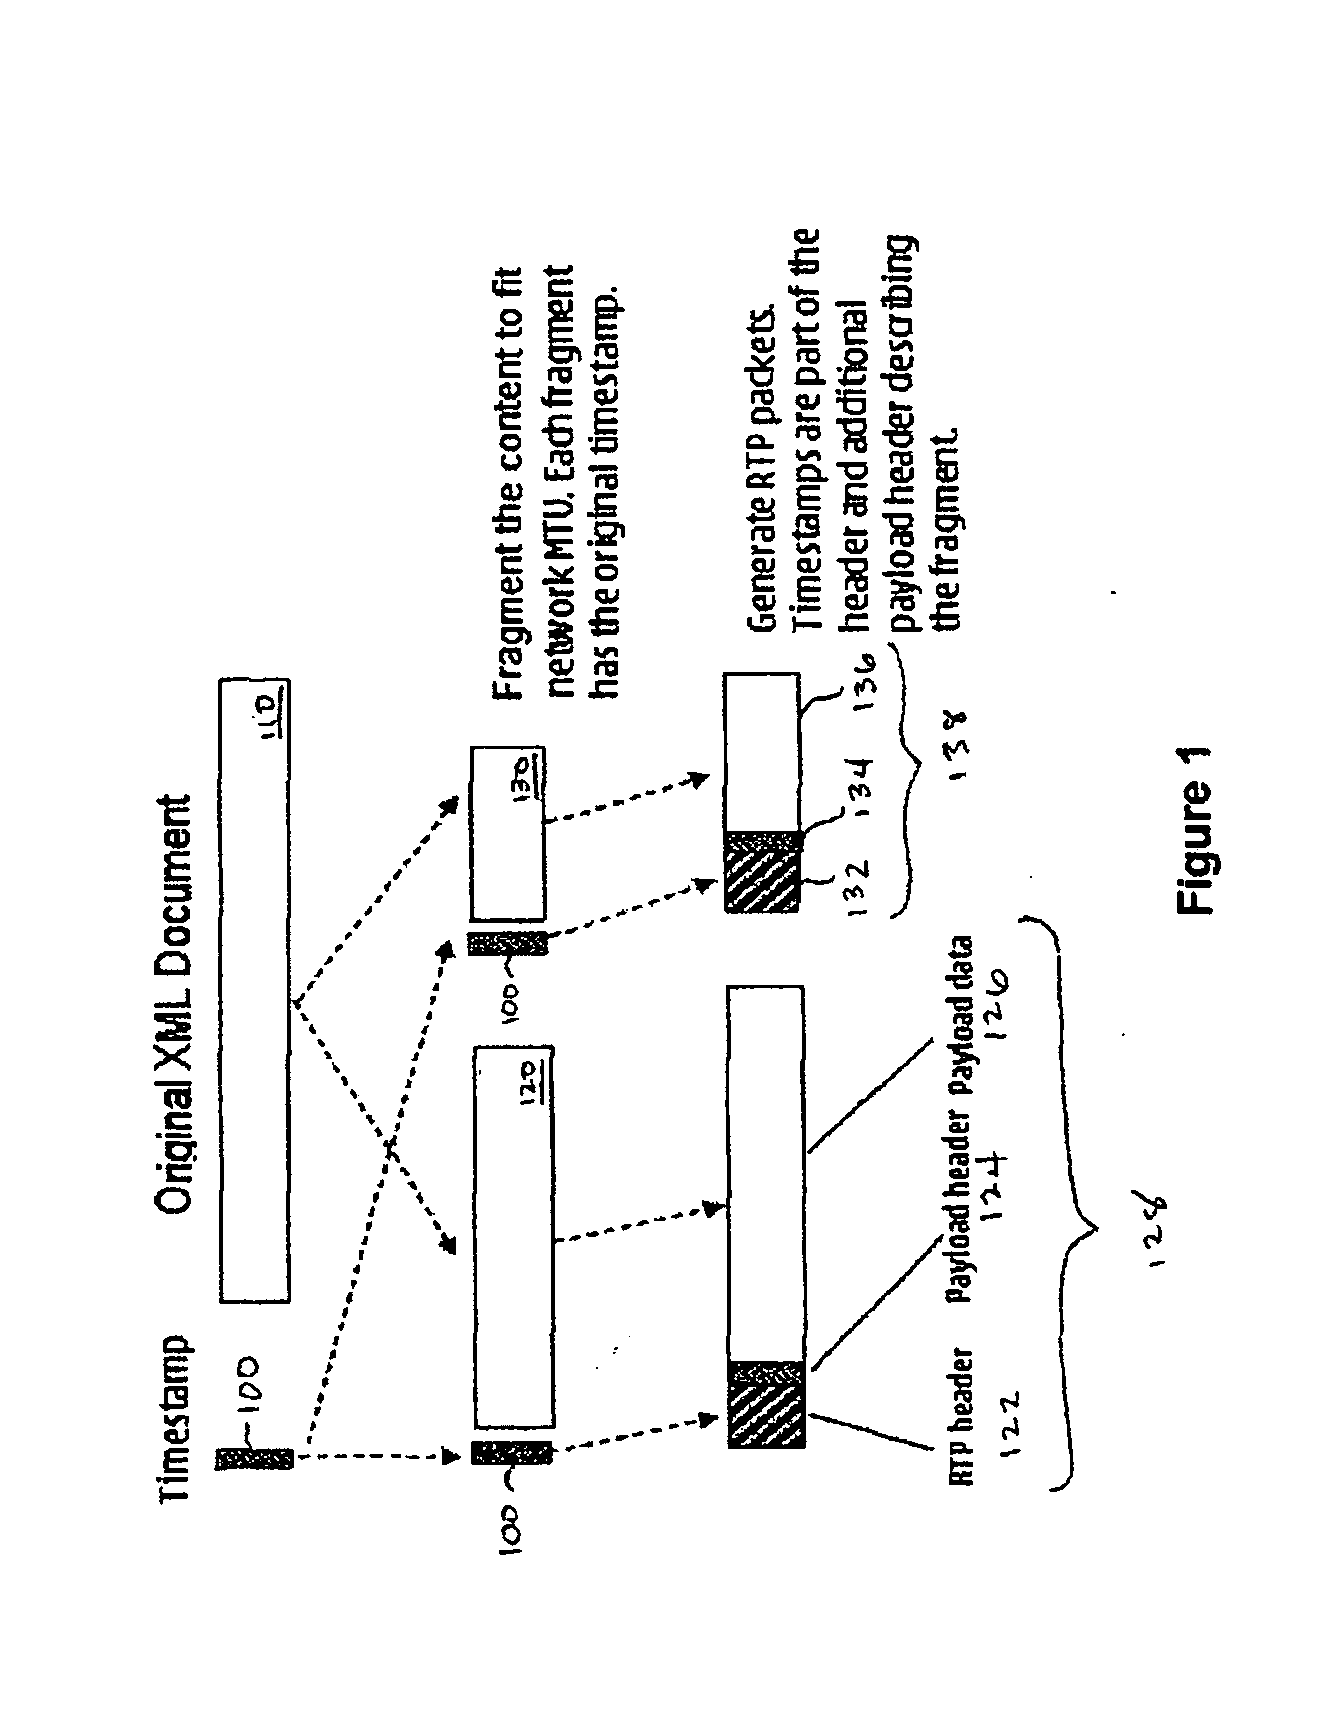 System and method of XML based content fragmentation for rich media streaming